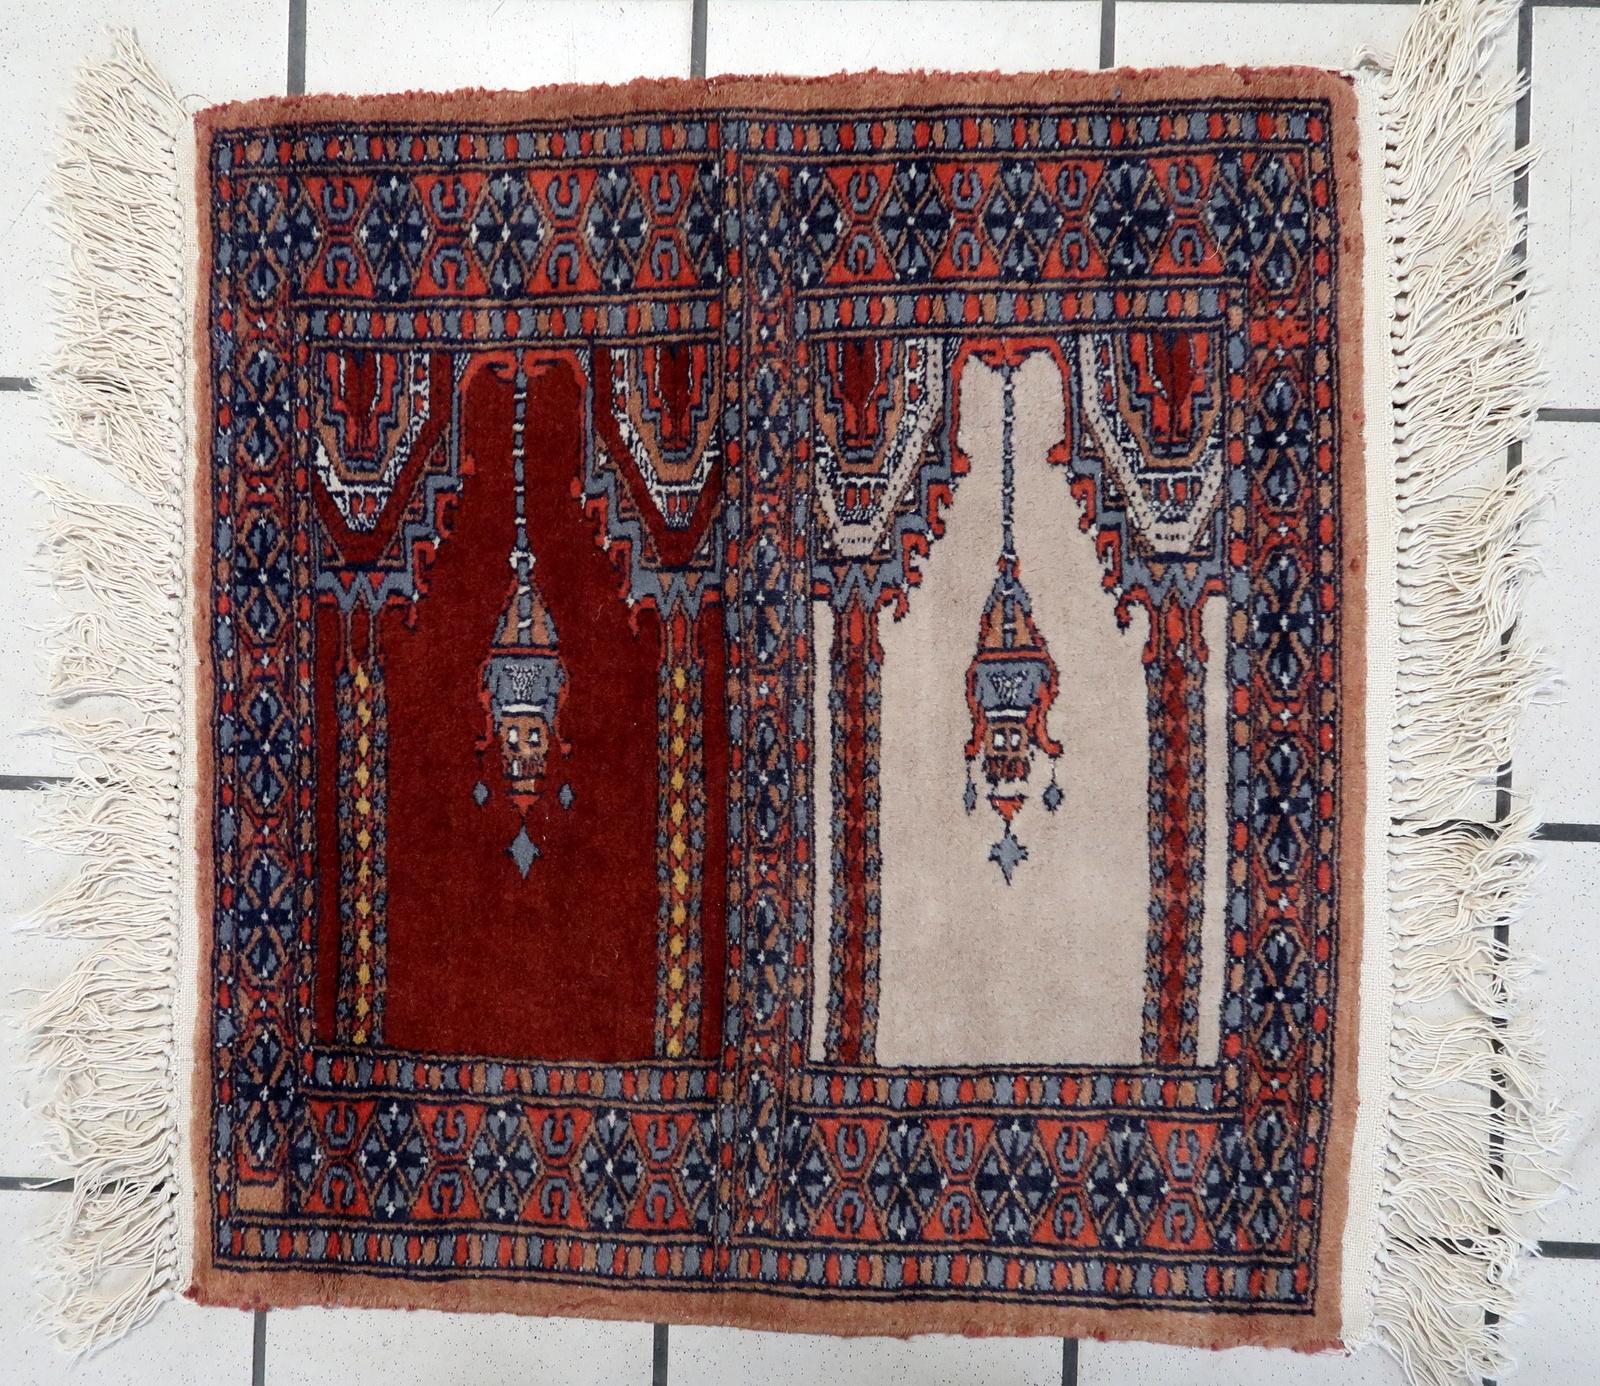 Handmade Vintage Pakistani Lahore Prayer Rug:

Design and Colors:
This square-shaped rug showcases intricate craftsmanship.
The dominant colors include:
Deep Reds: These warm tones evoke a sense of tradition and spirituality.
Blues: Interspersed